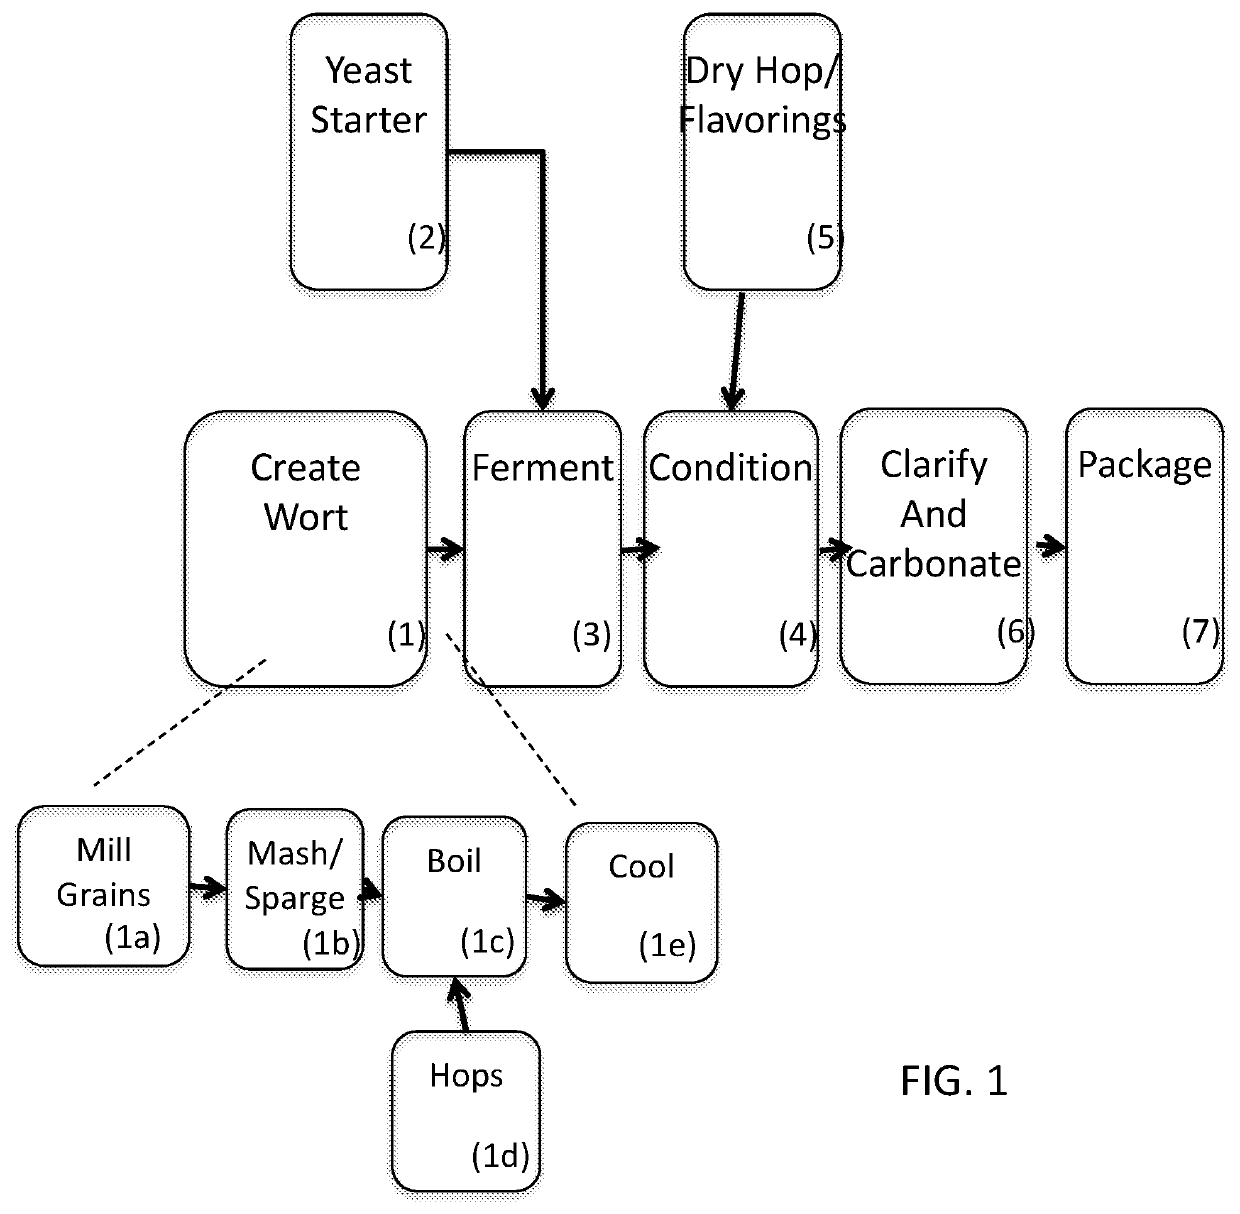 Method for Creating a Craft Beer with Low Alcohol Content